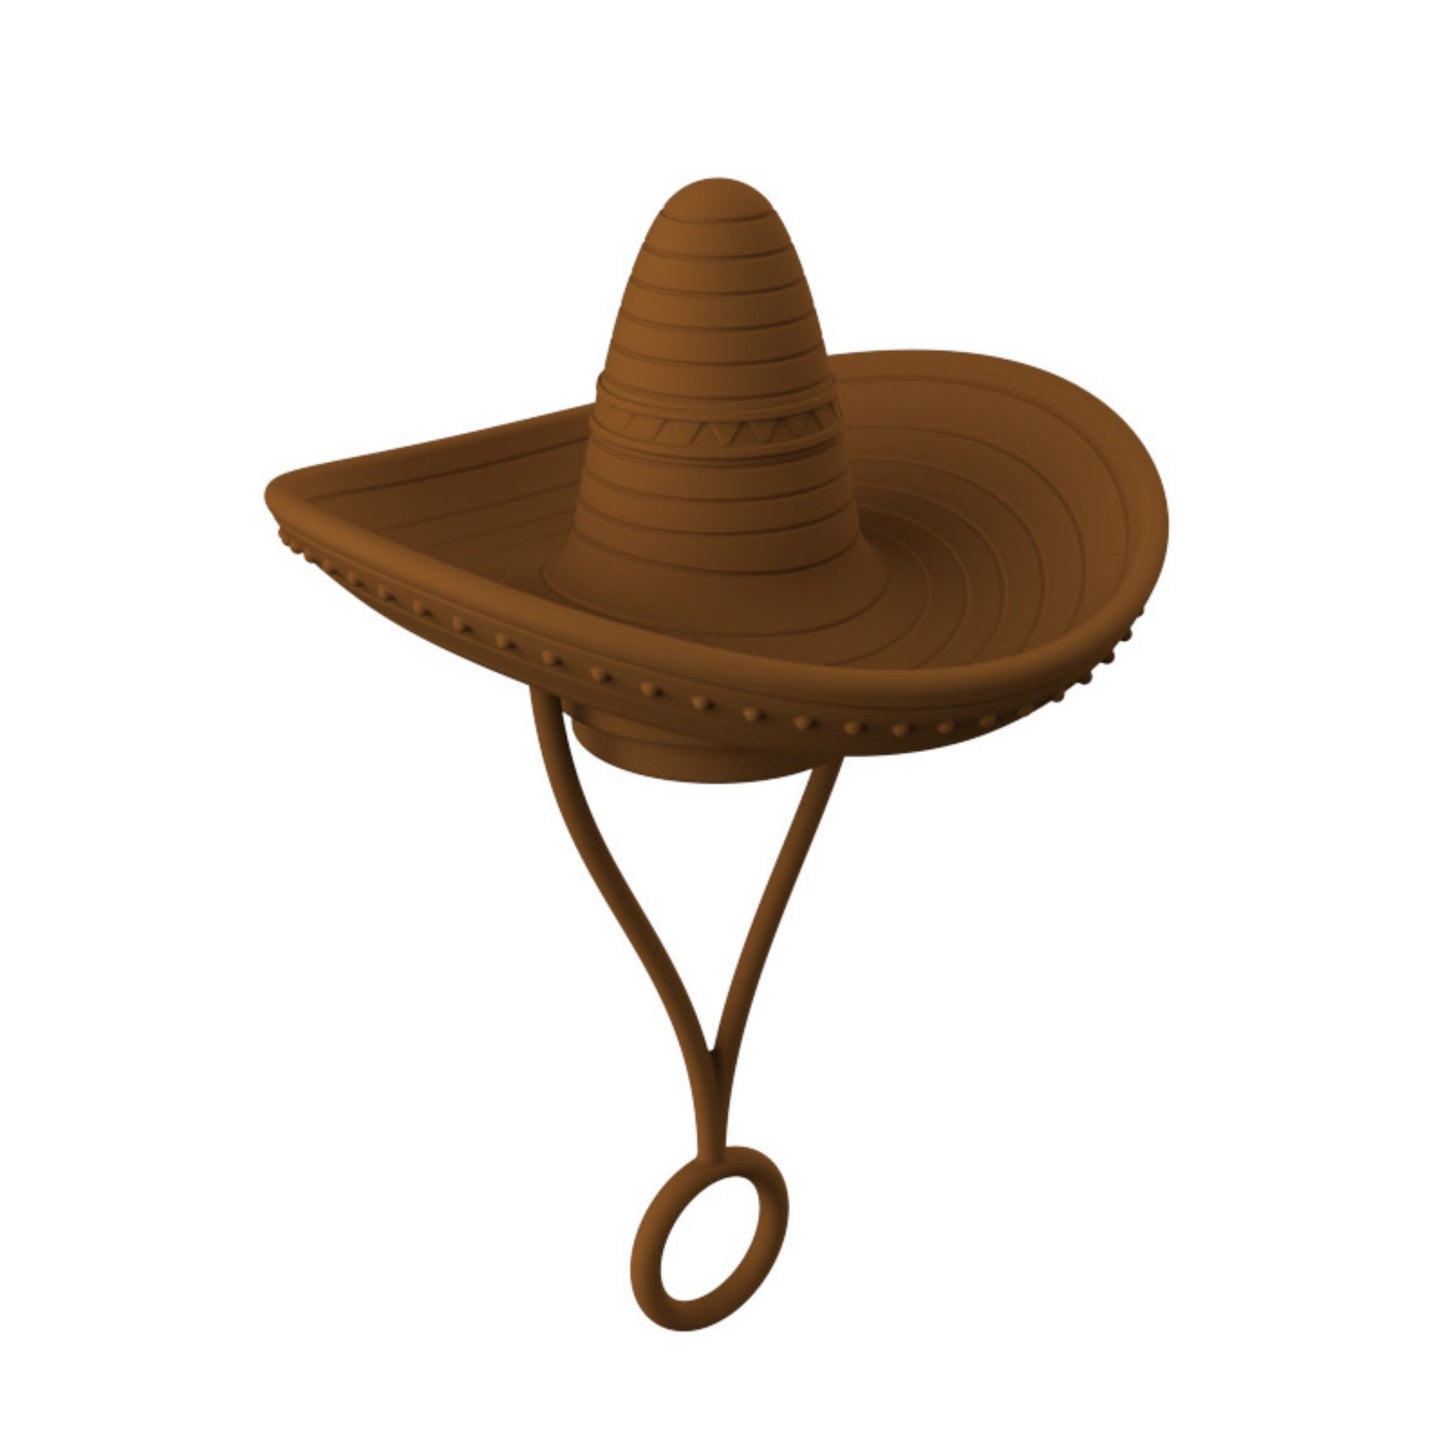 New Style Straw Covers Cap Novelty Sturdy Straw Toppers Reusable Cowboy Hat Shaped For Camping Home Hiking Picnic Kitchen